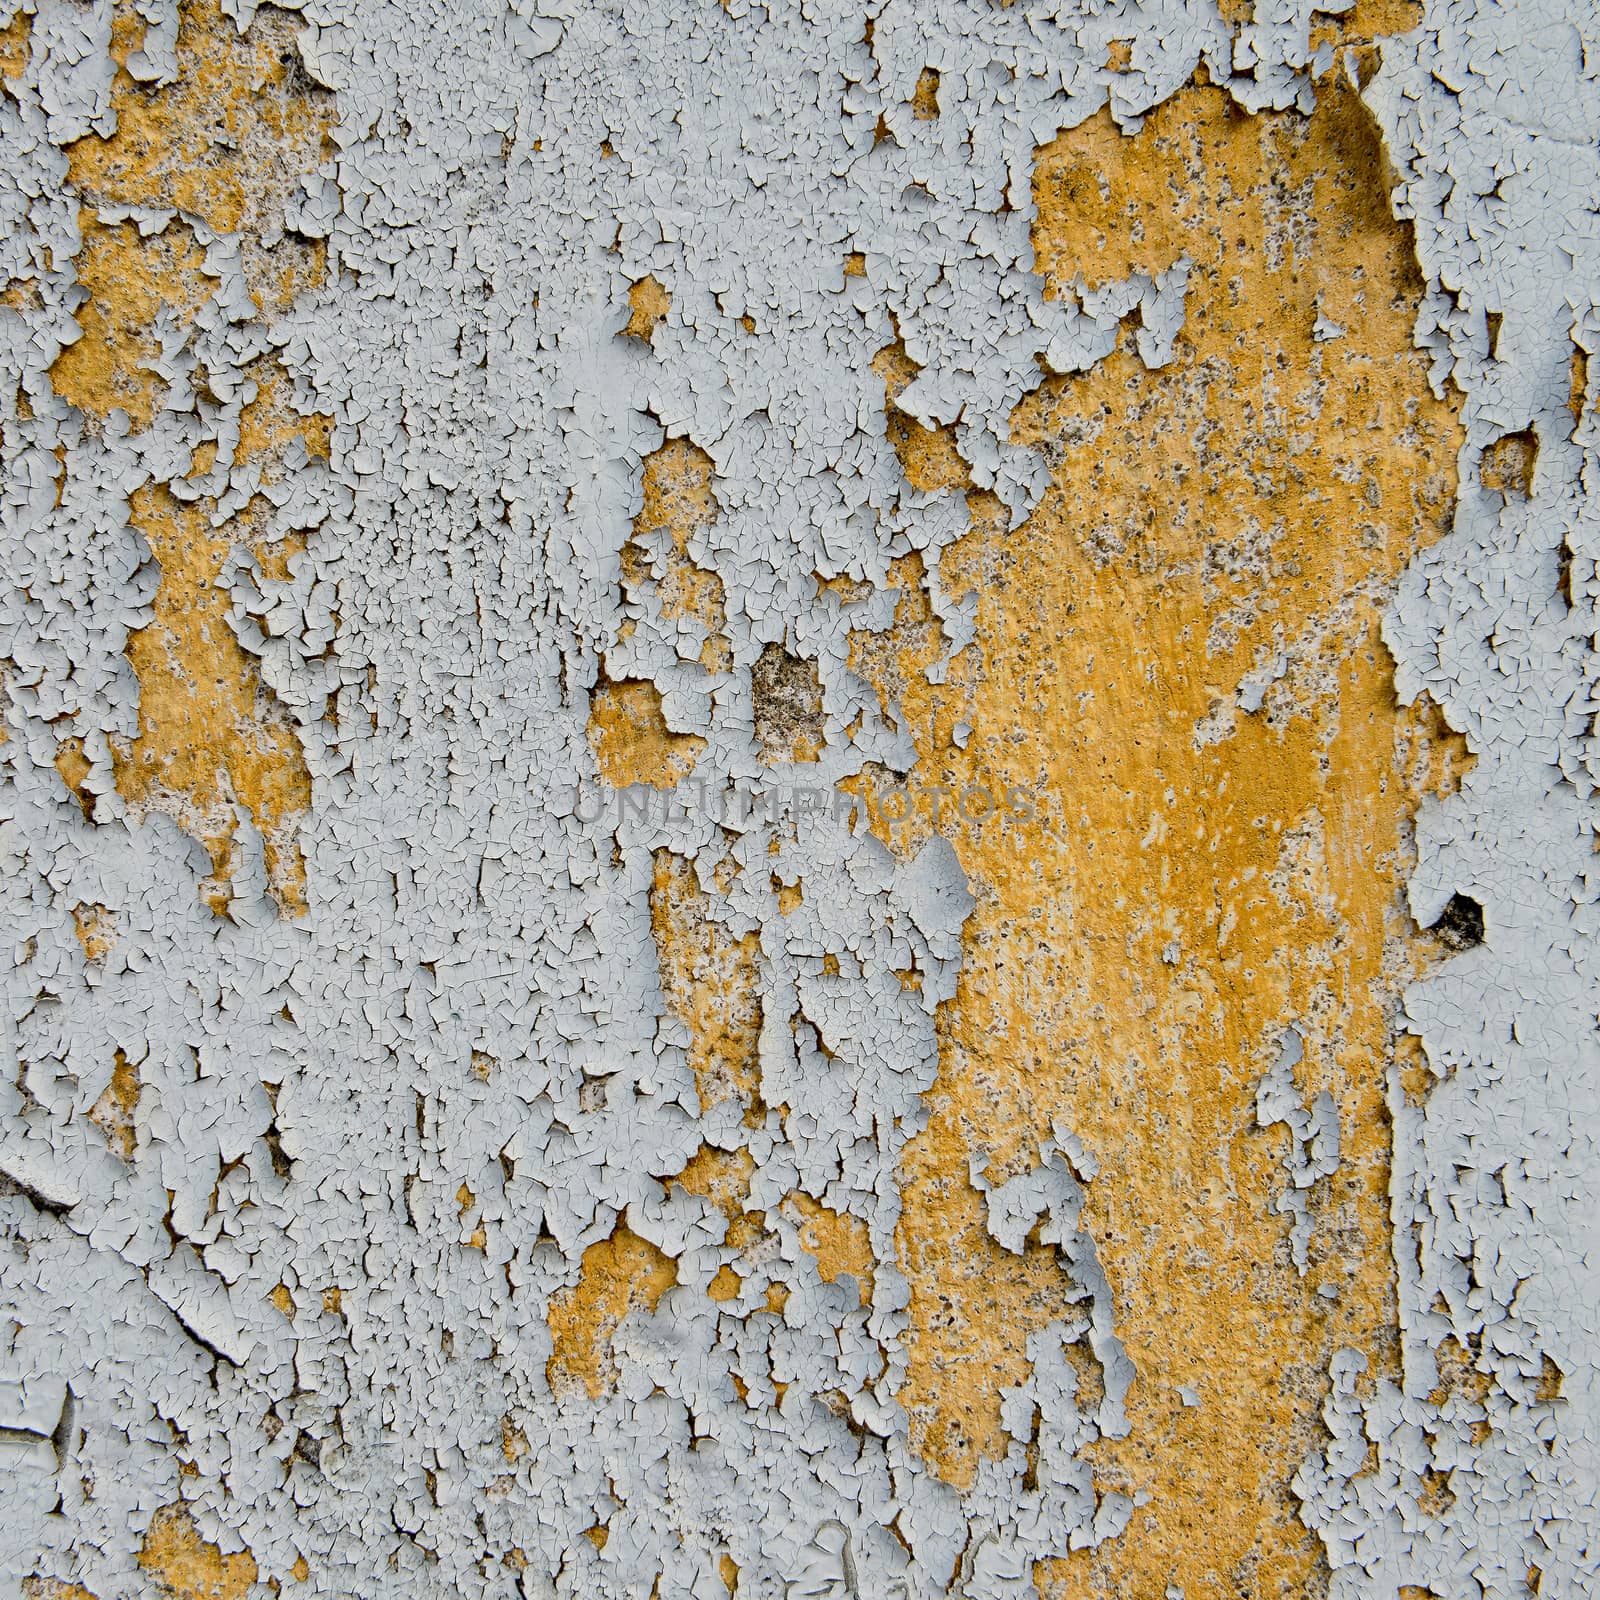 old cracked paint on the concrete wall 